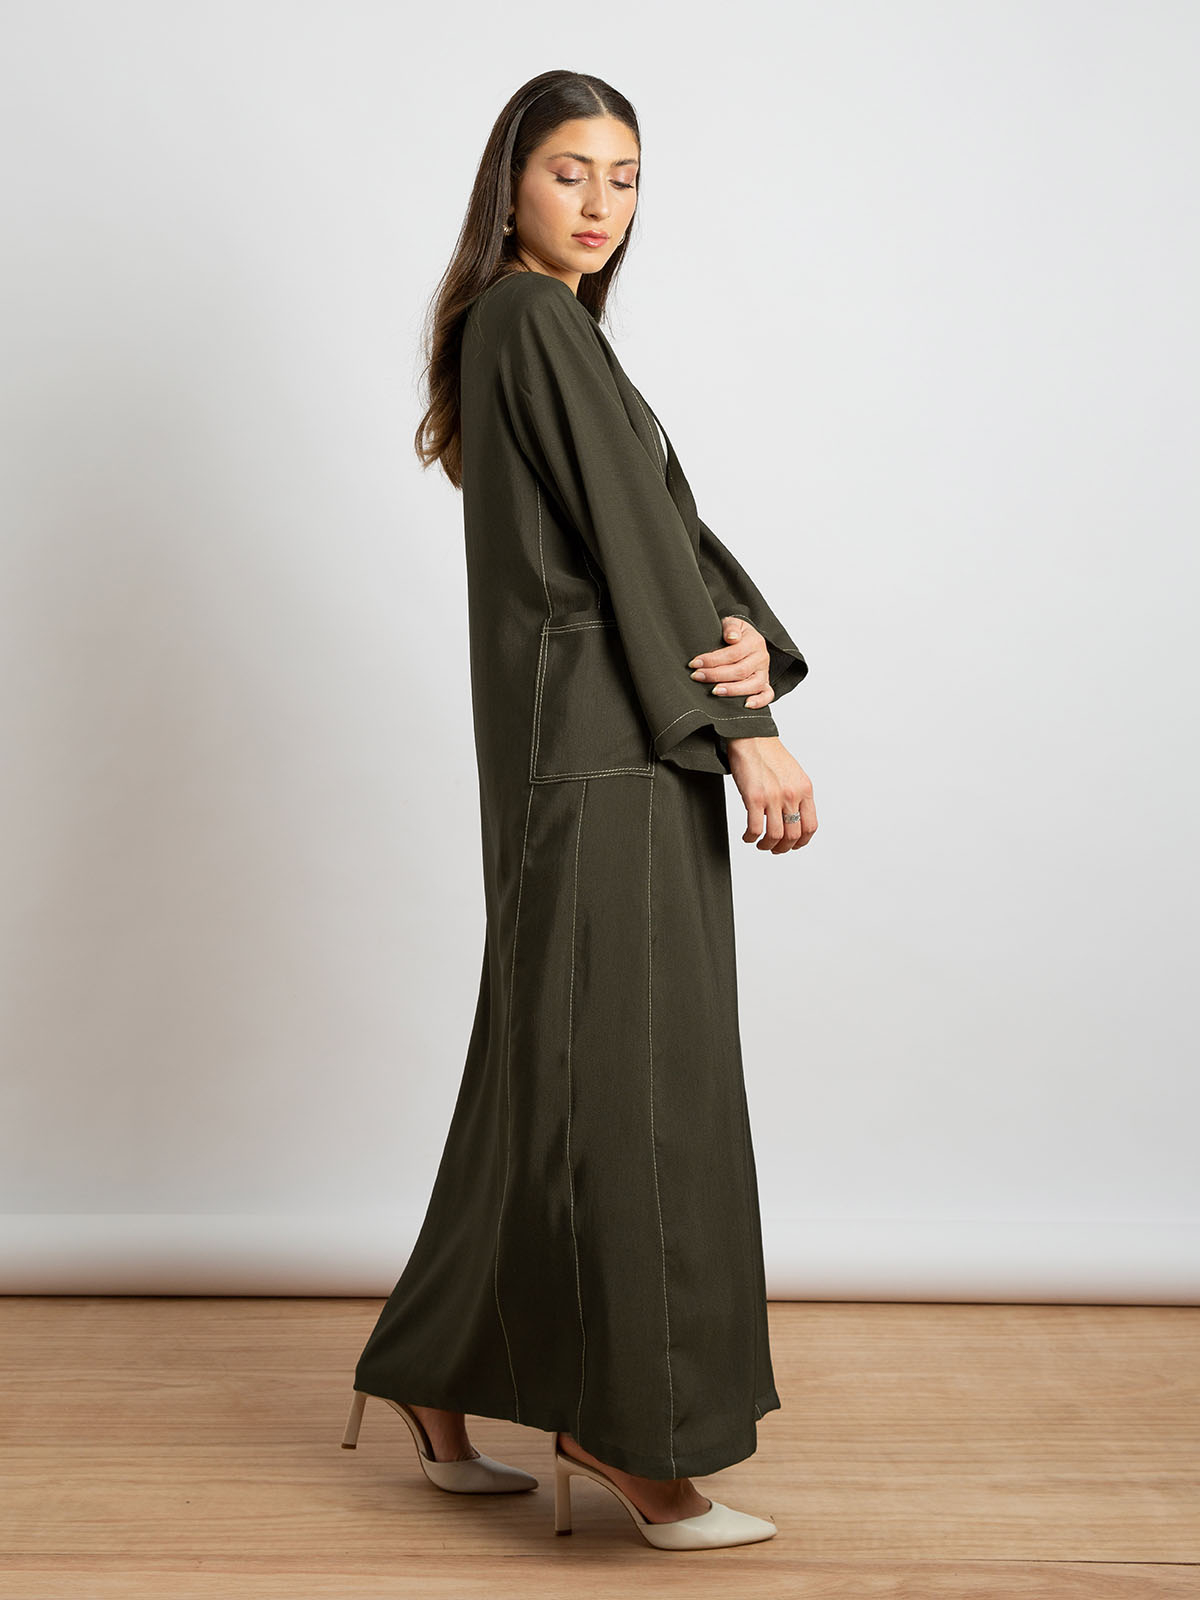 Kaafmeem women clothing regular fit olive long practical salona abstract daily abaya with two pockets in lightweight fabric